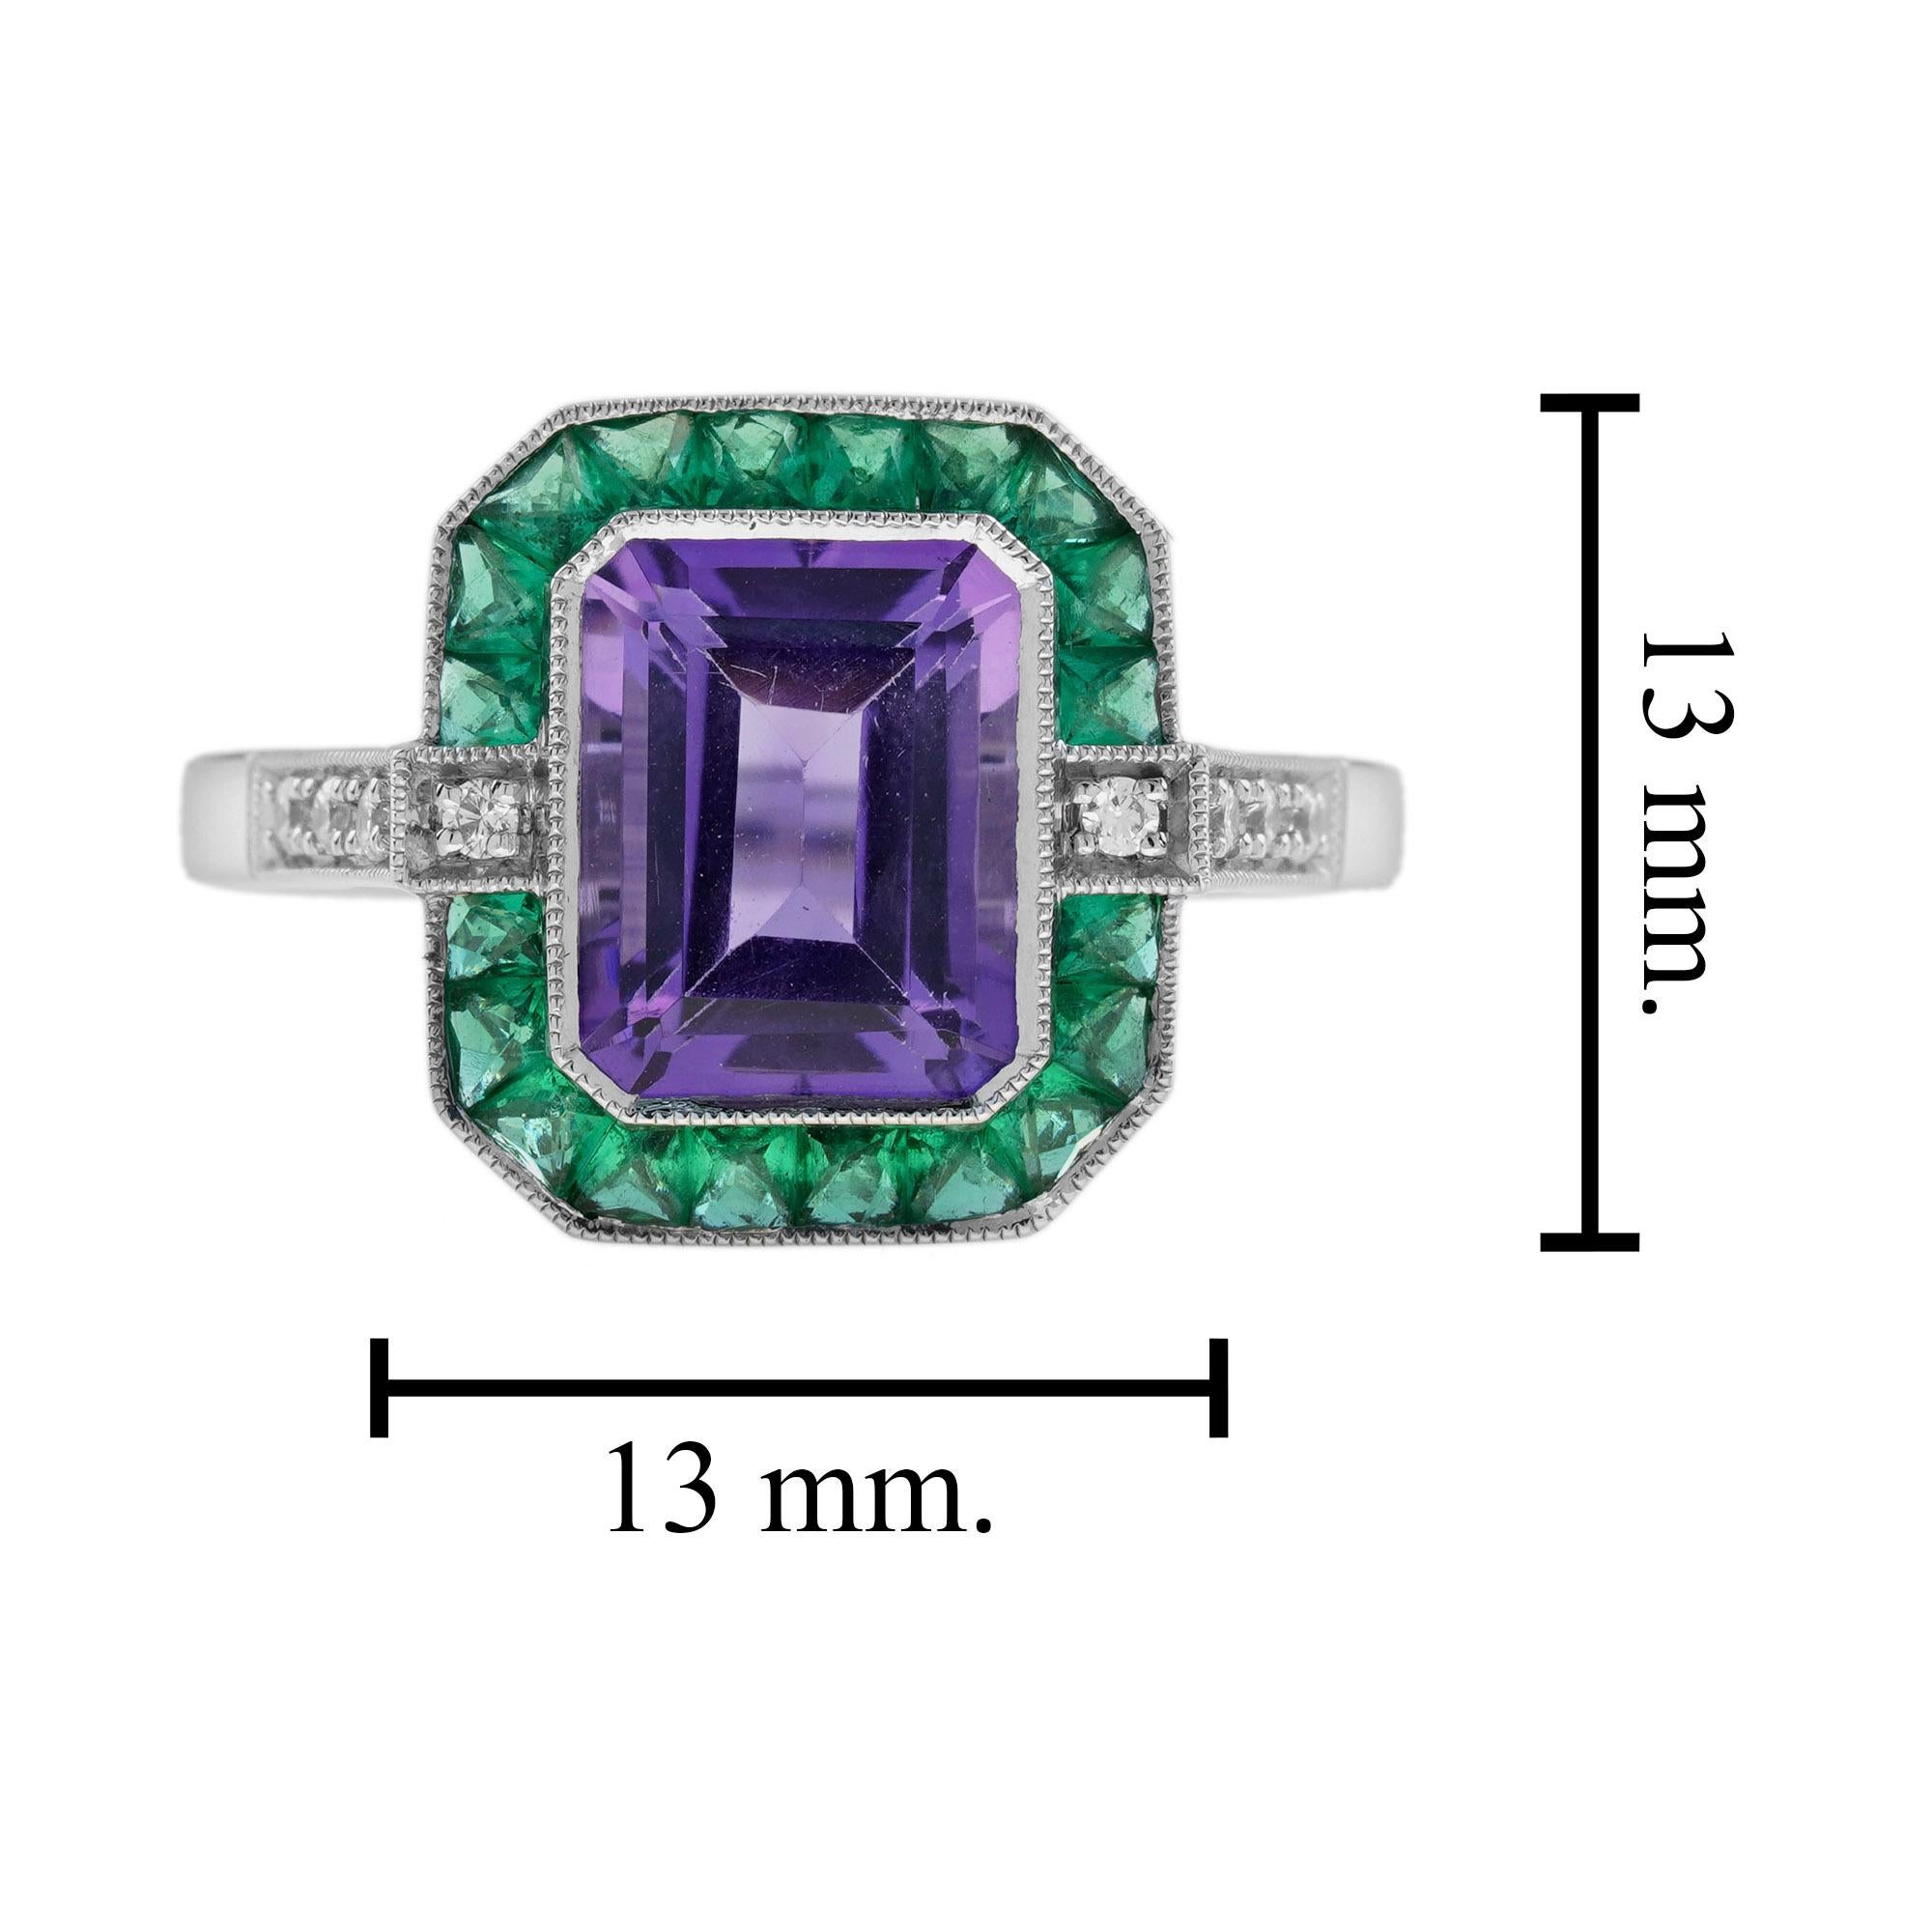 For Sale:  Emerald Cut Amethyst Emerald and Diamond Art Deco Style Ring in 14K White Gold 7